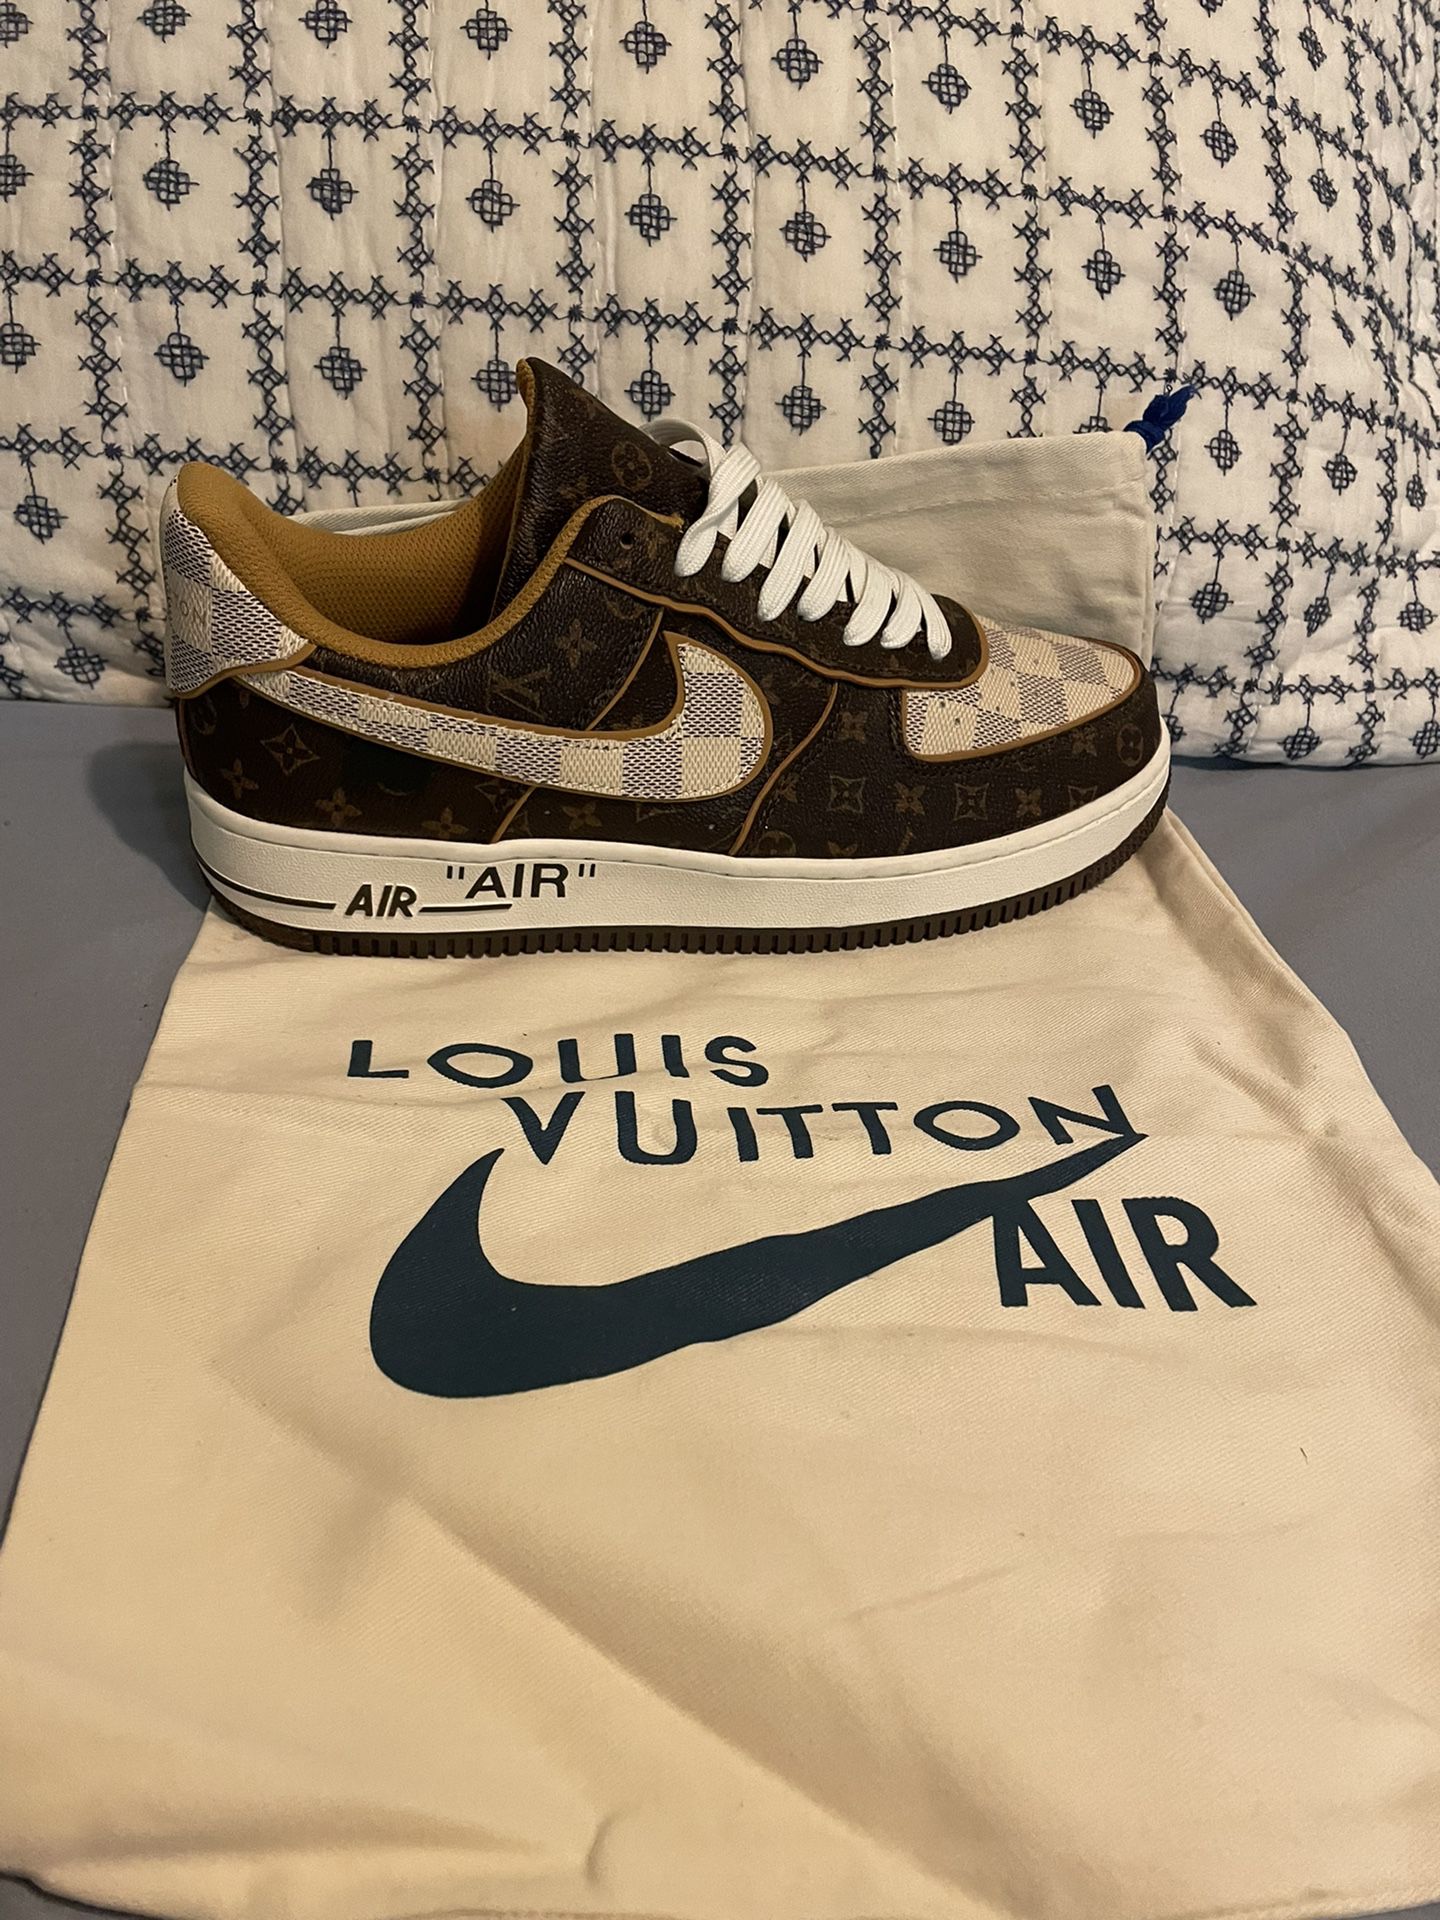 How To Buy Louis Vuitton Nike Air Force 1 Auction